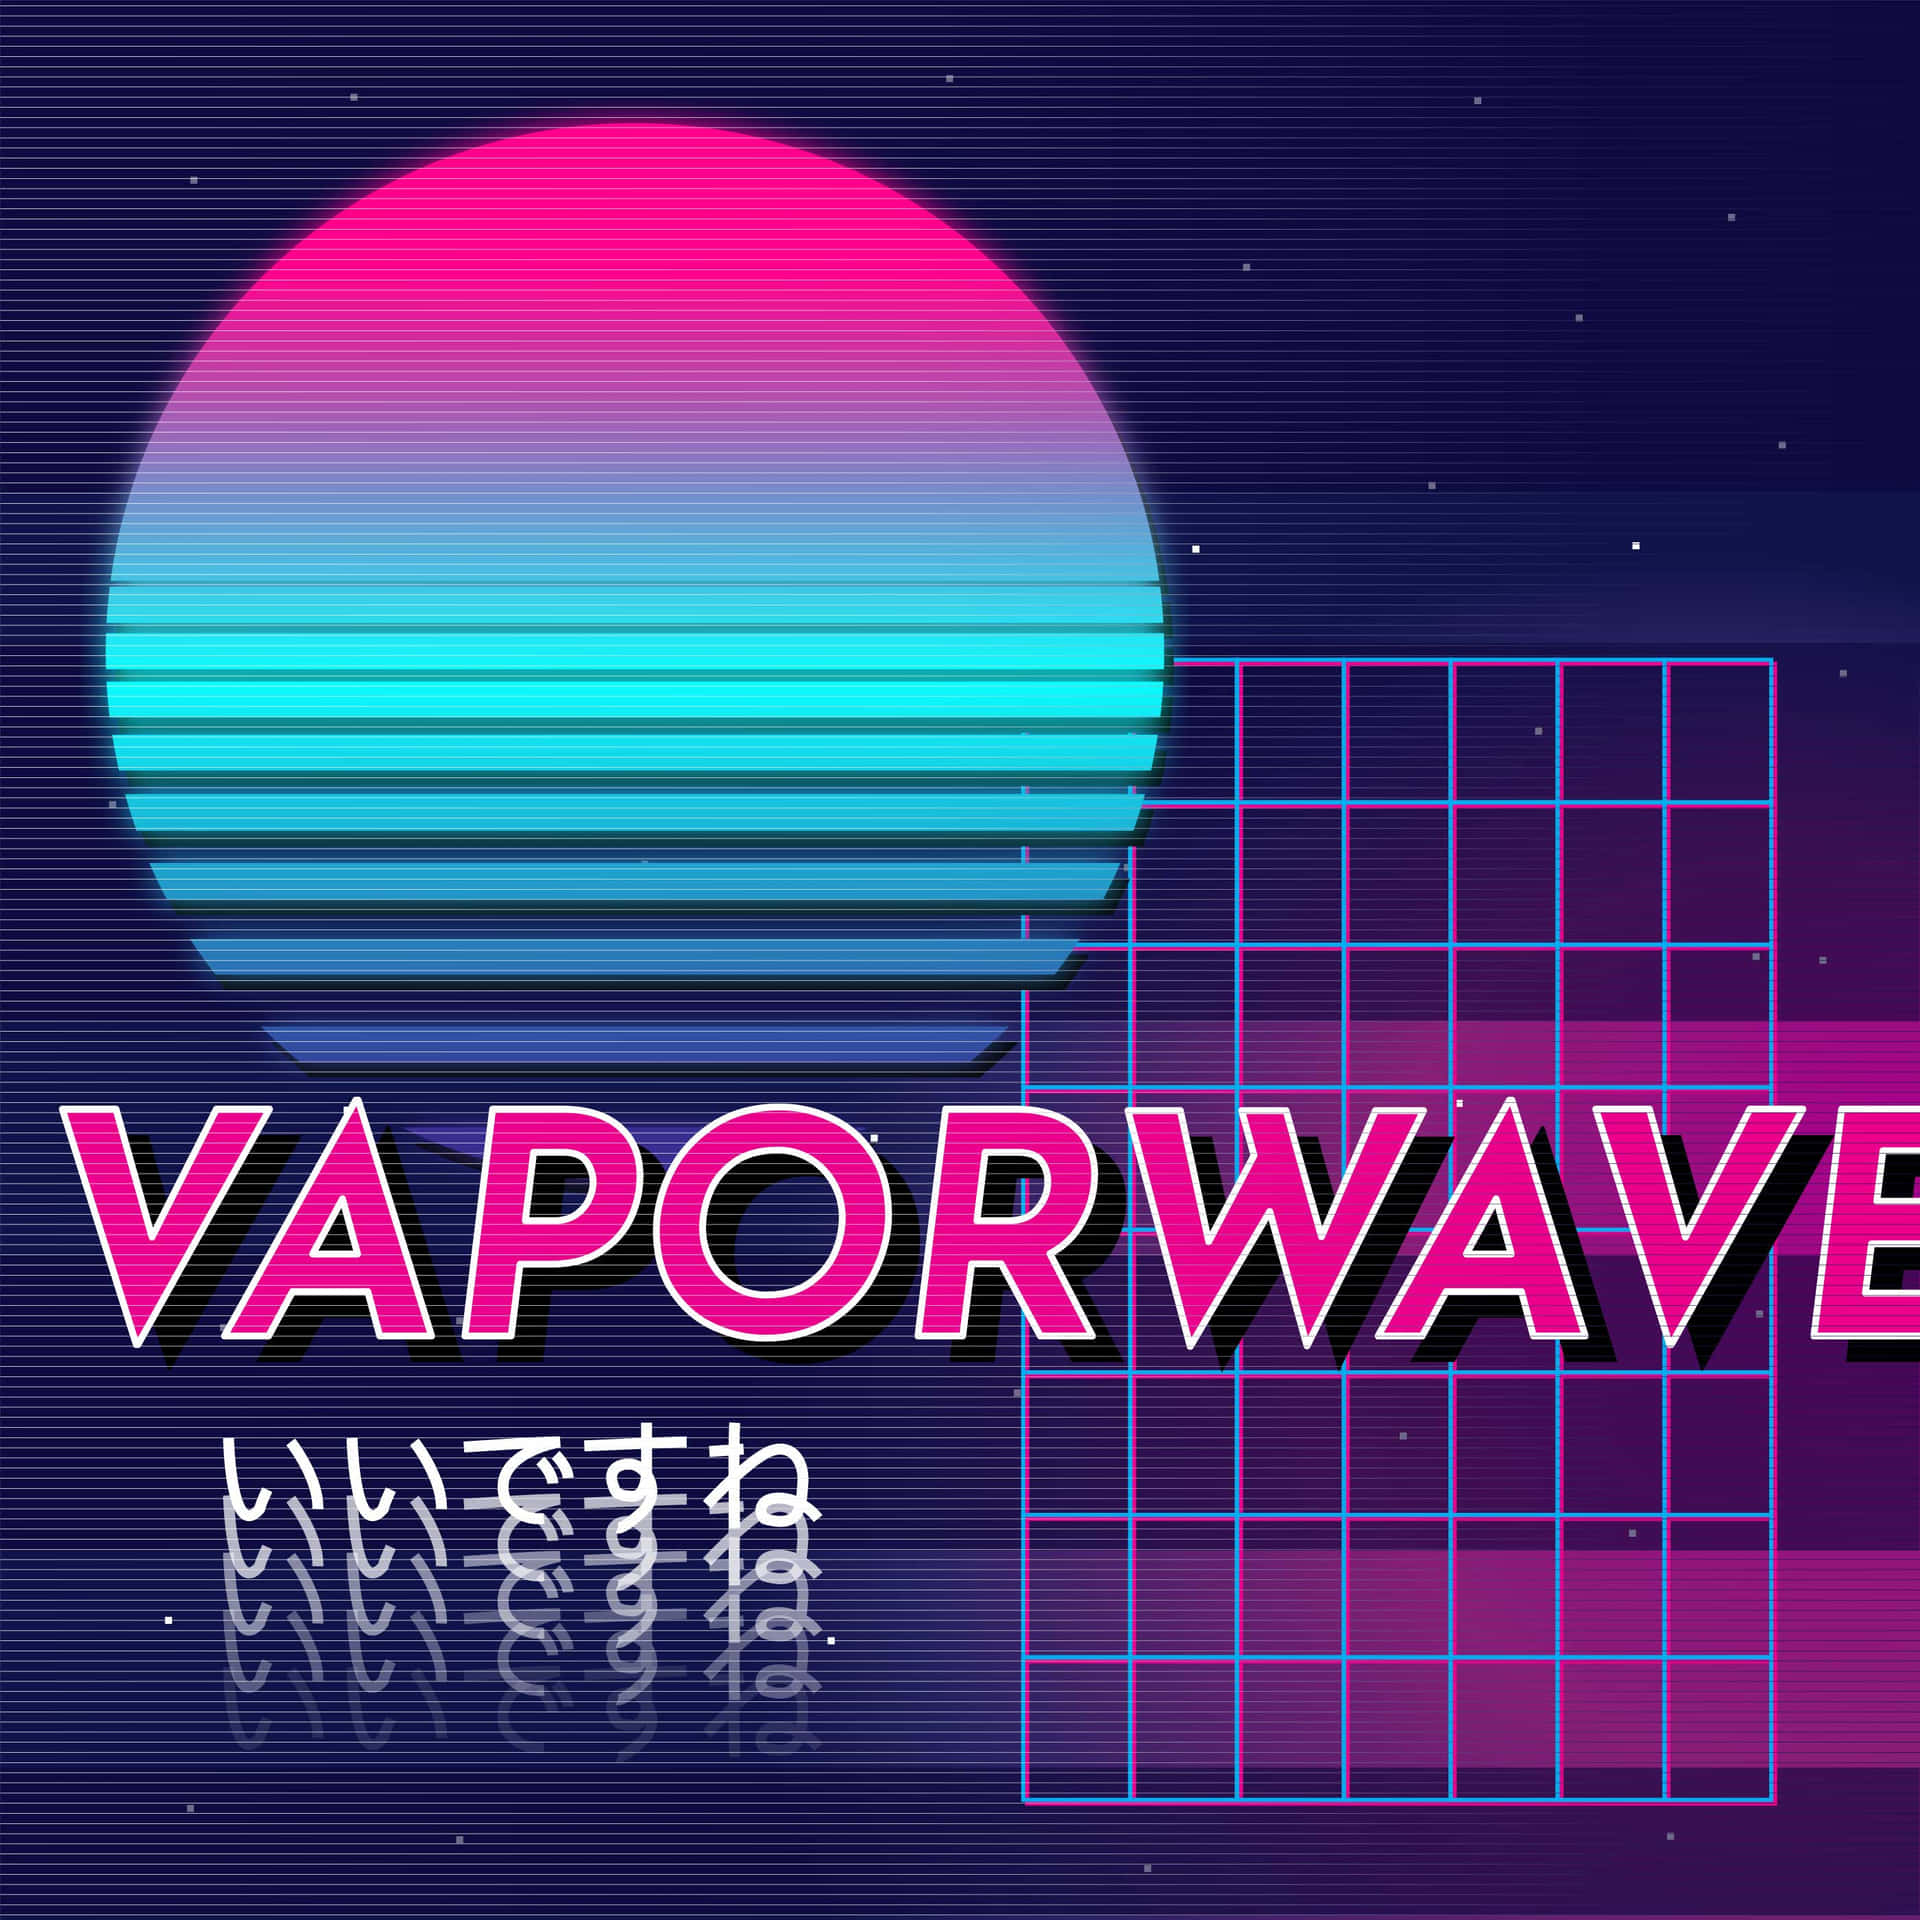 A glimpse of the future in the eyes of the 80s Wallpaper